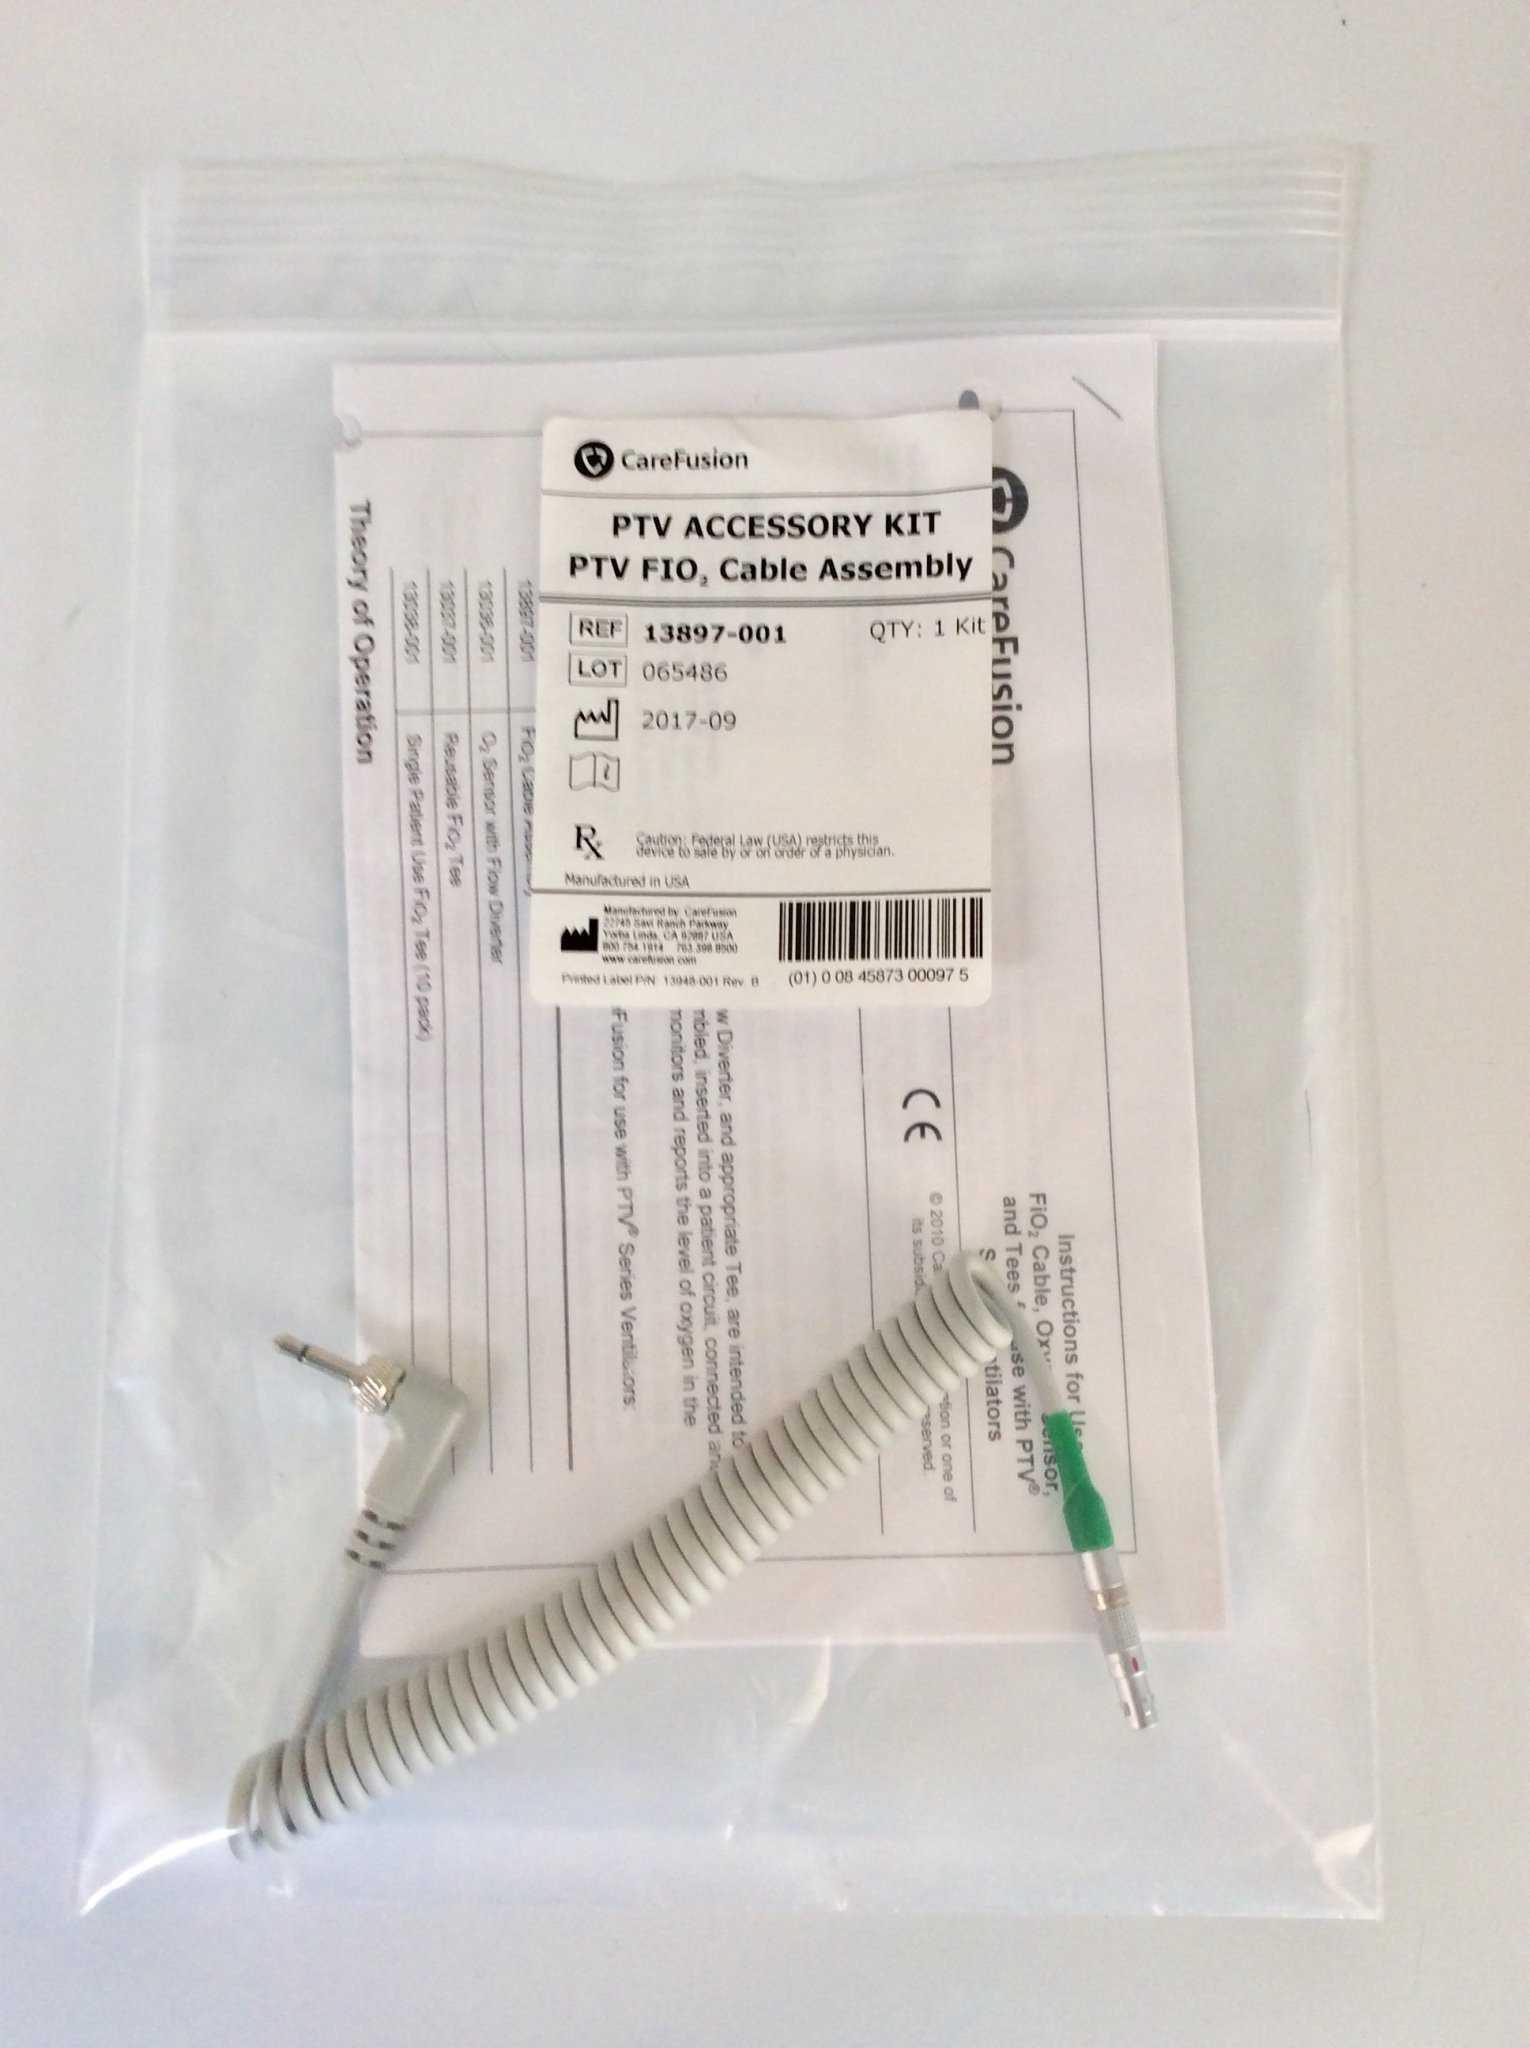 NEW CareFusion Vyaire ReVel EnVe PTV Accessory Kit PTV FIO2 Cable Assembly 13897-001 - MBR Medicals